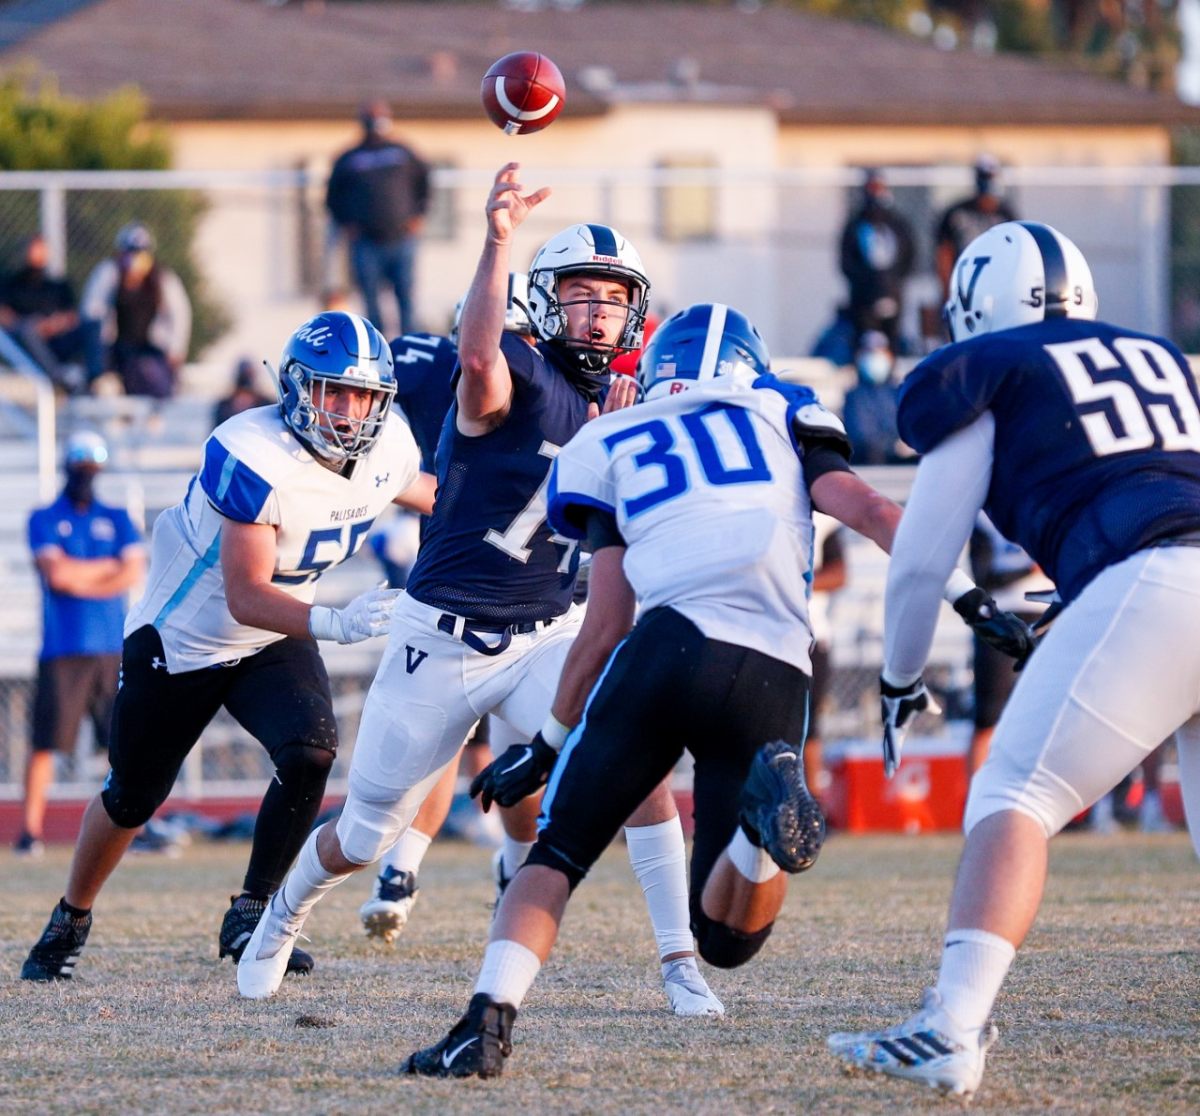 Venice quarterback Sam Vaulton throws a pass during the Gondoliers' 36-0 victory over Palisades.